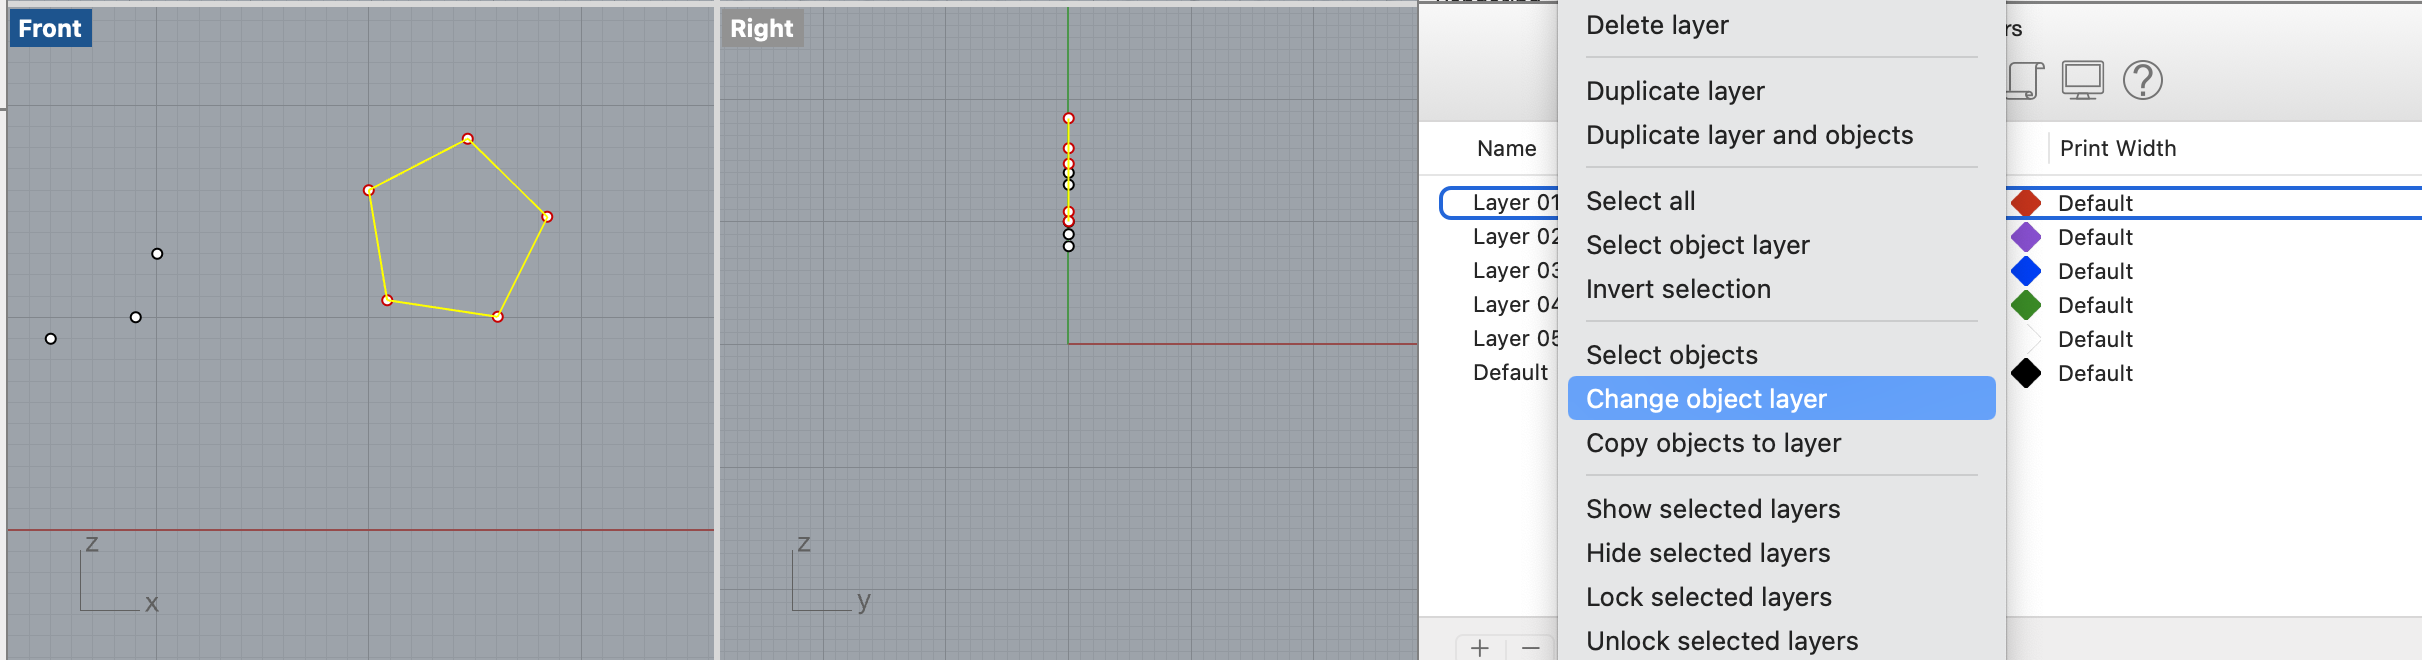 COMMAND SelCrv for selection all the curve after click on the layer and **change object layer**